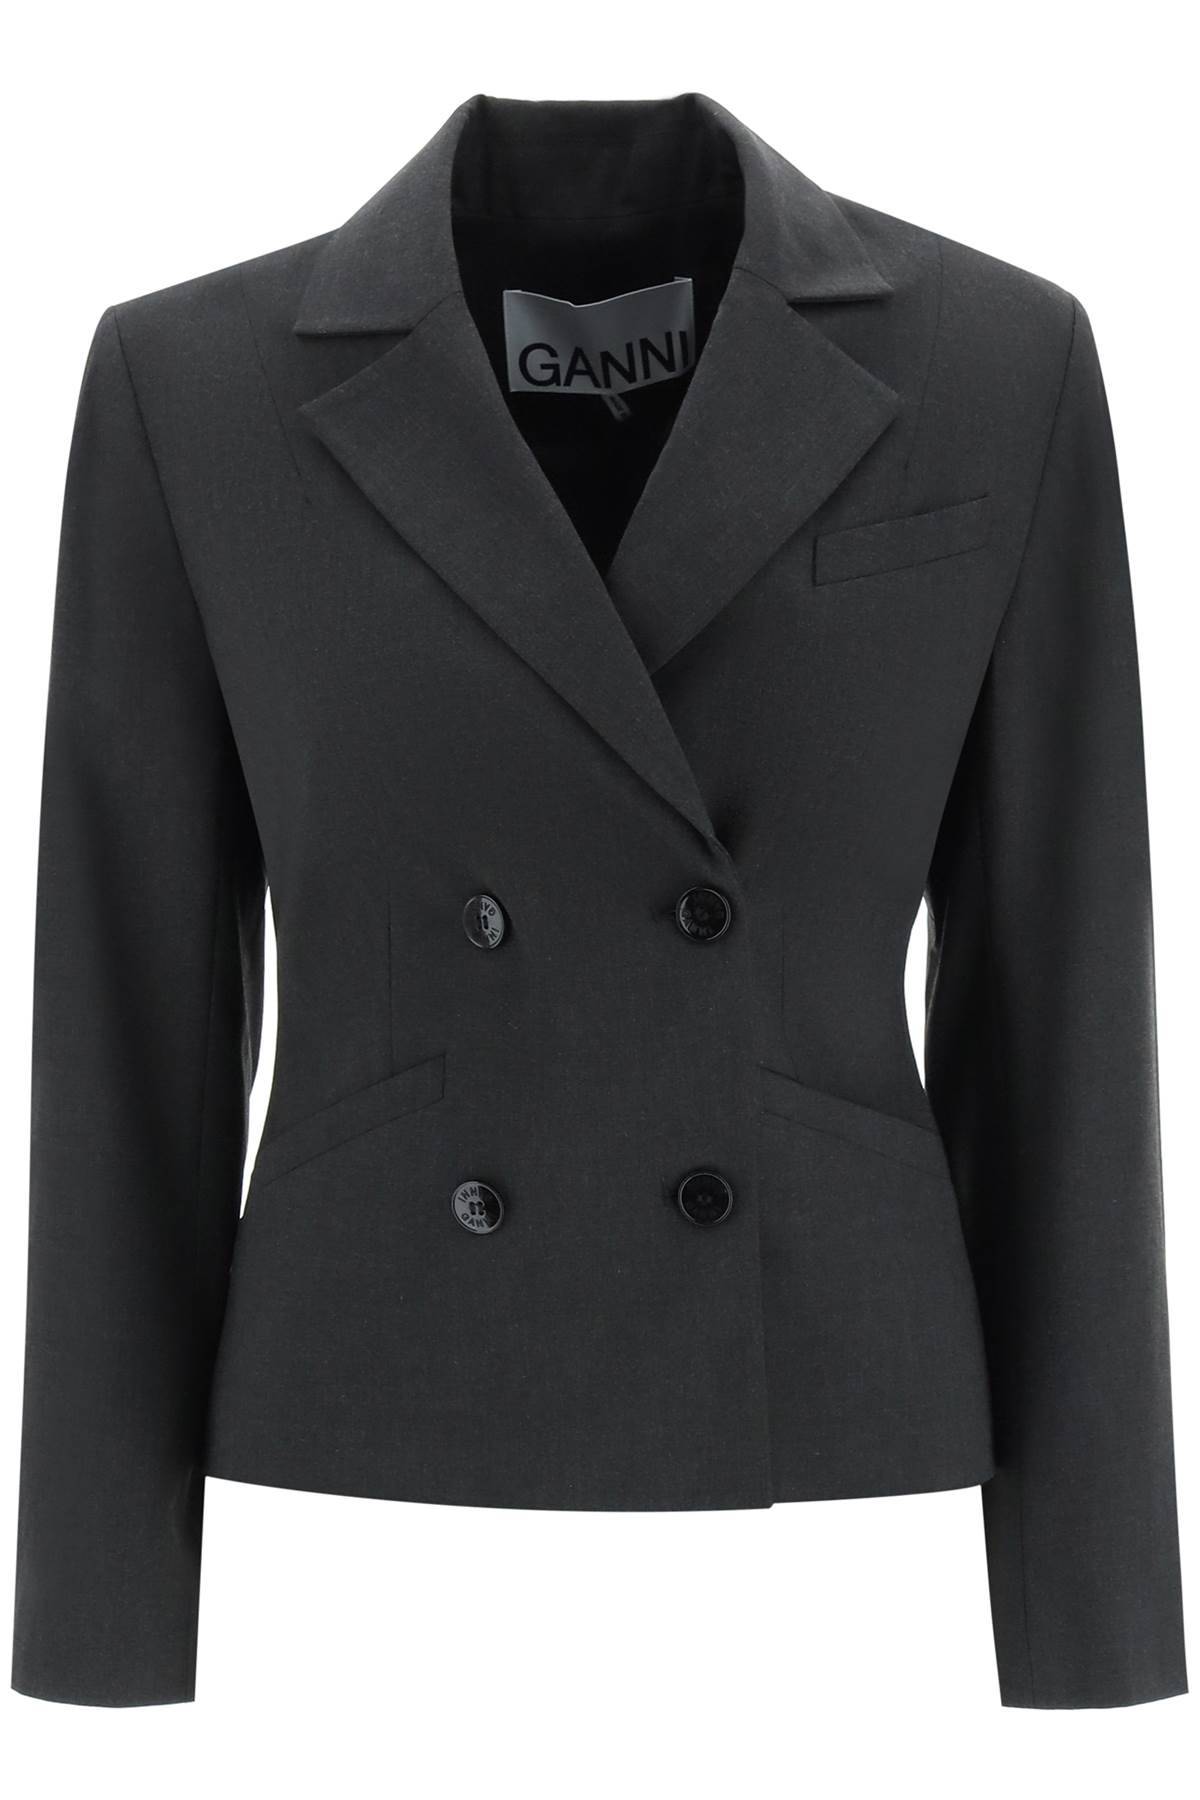 GANNI waisted double-breasted blazer